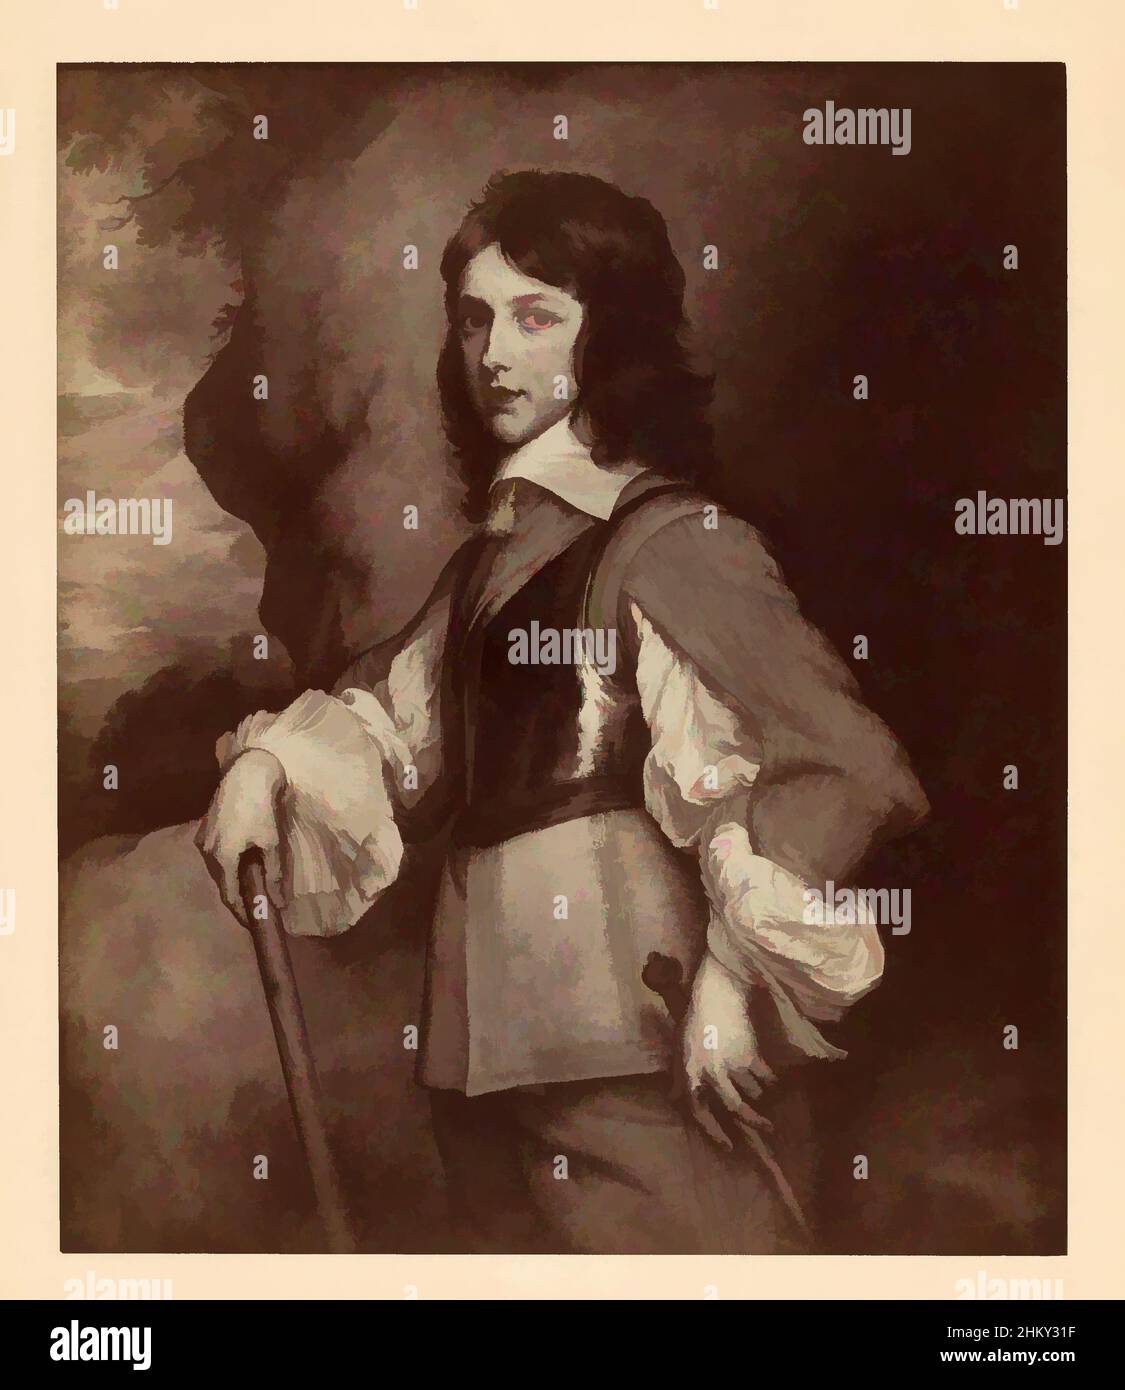 Art inspired by Photoreproduction of a painting by Anthony van Dyck, Portrait of William II, from the collection of the Hermitage in St. Petersburg, Prince William II, after: Anthony van Dyck, Sint-Petersburg, 1860 - 1890, paper, cardboard, albumen print, height 395 mm × width 325 mm, Classic works modernized by Artotop with a splash of modernity. Shapes, color and value, eye-catching visual impact on art. Emotions through freedom of artworks in a contemporary way. A timeless message pursuing a wildly creative new direction. Artists turning to the digital medium and creating the Artotop NFT Stock Photo